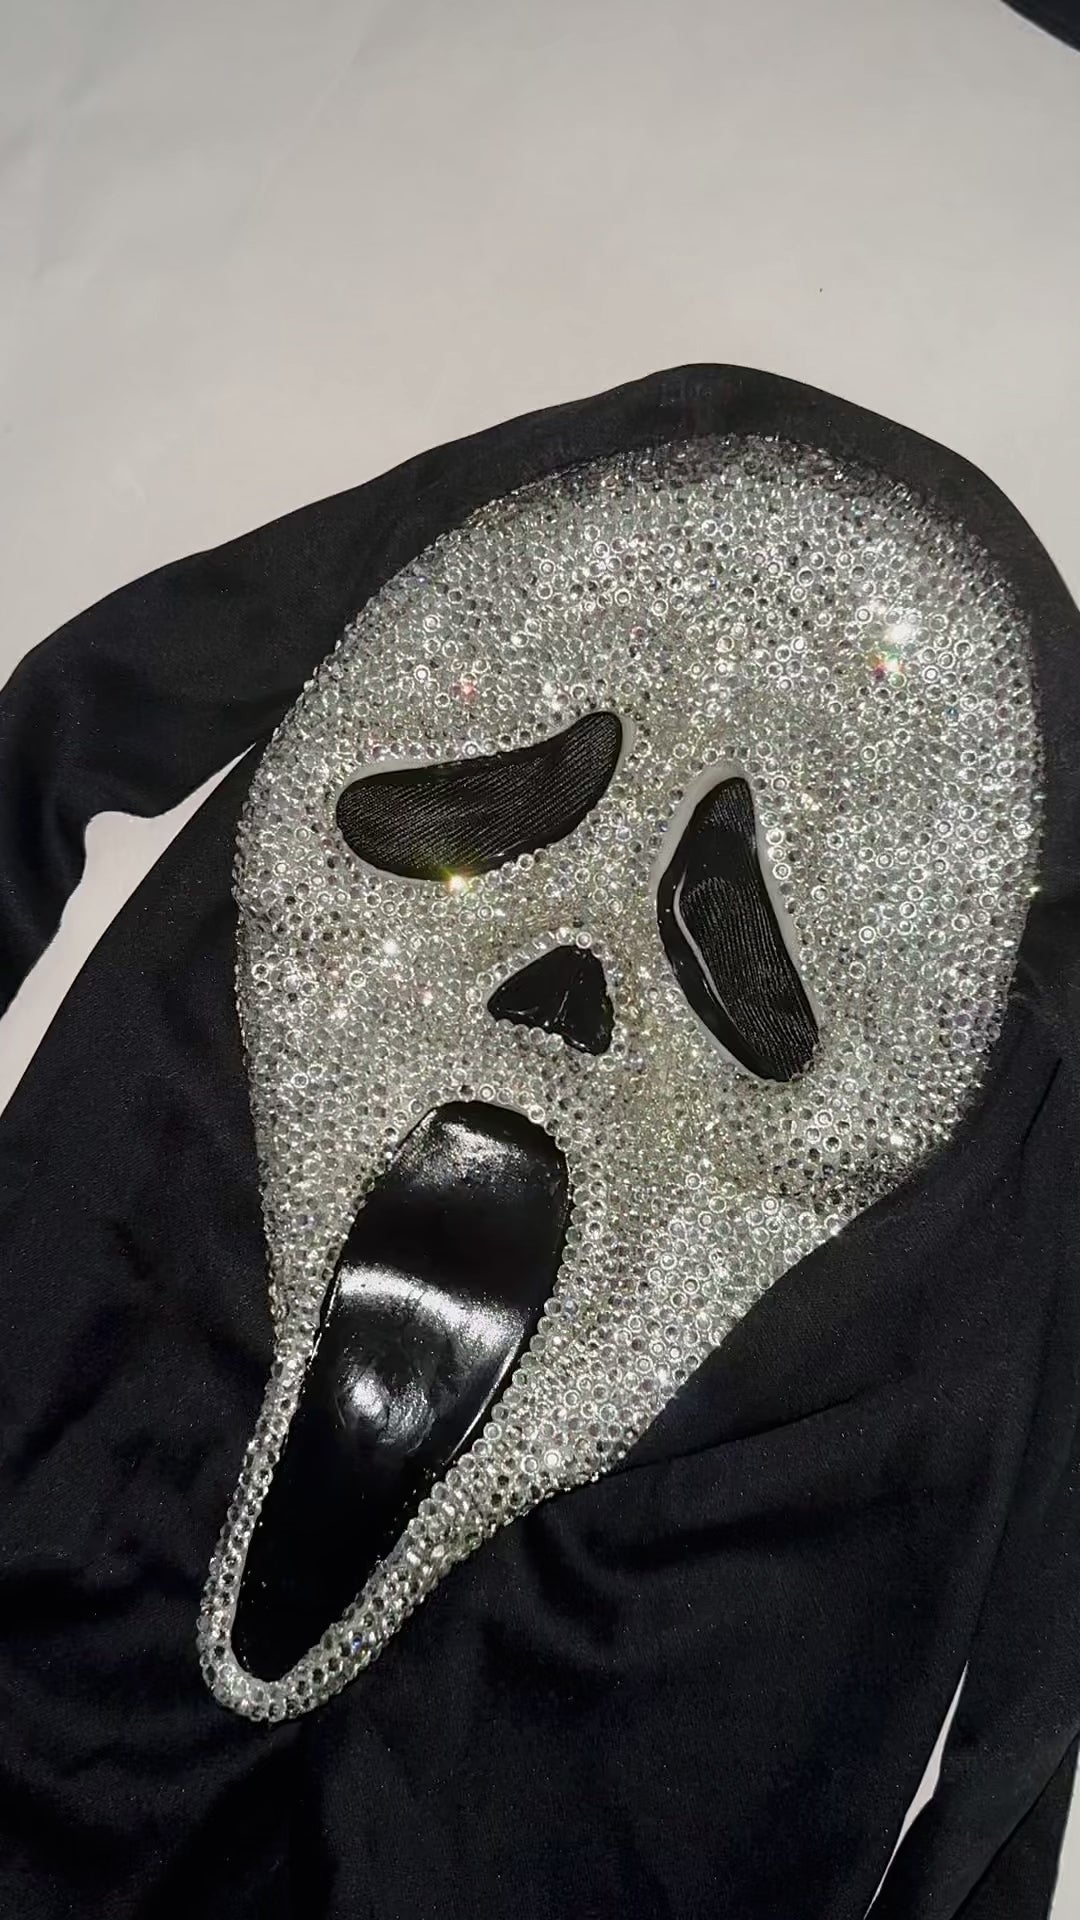 Crystalized Ghostface Mask – Bling'd Up